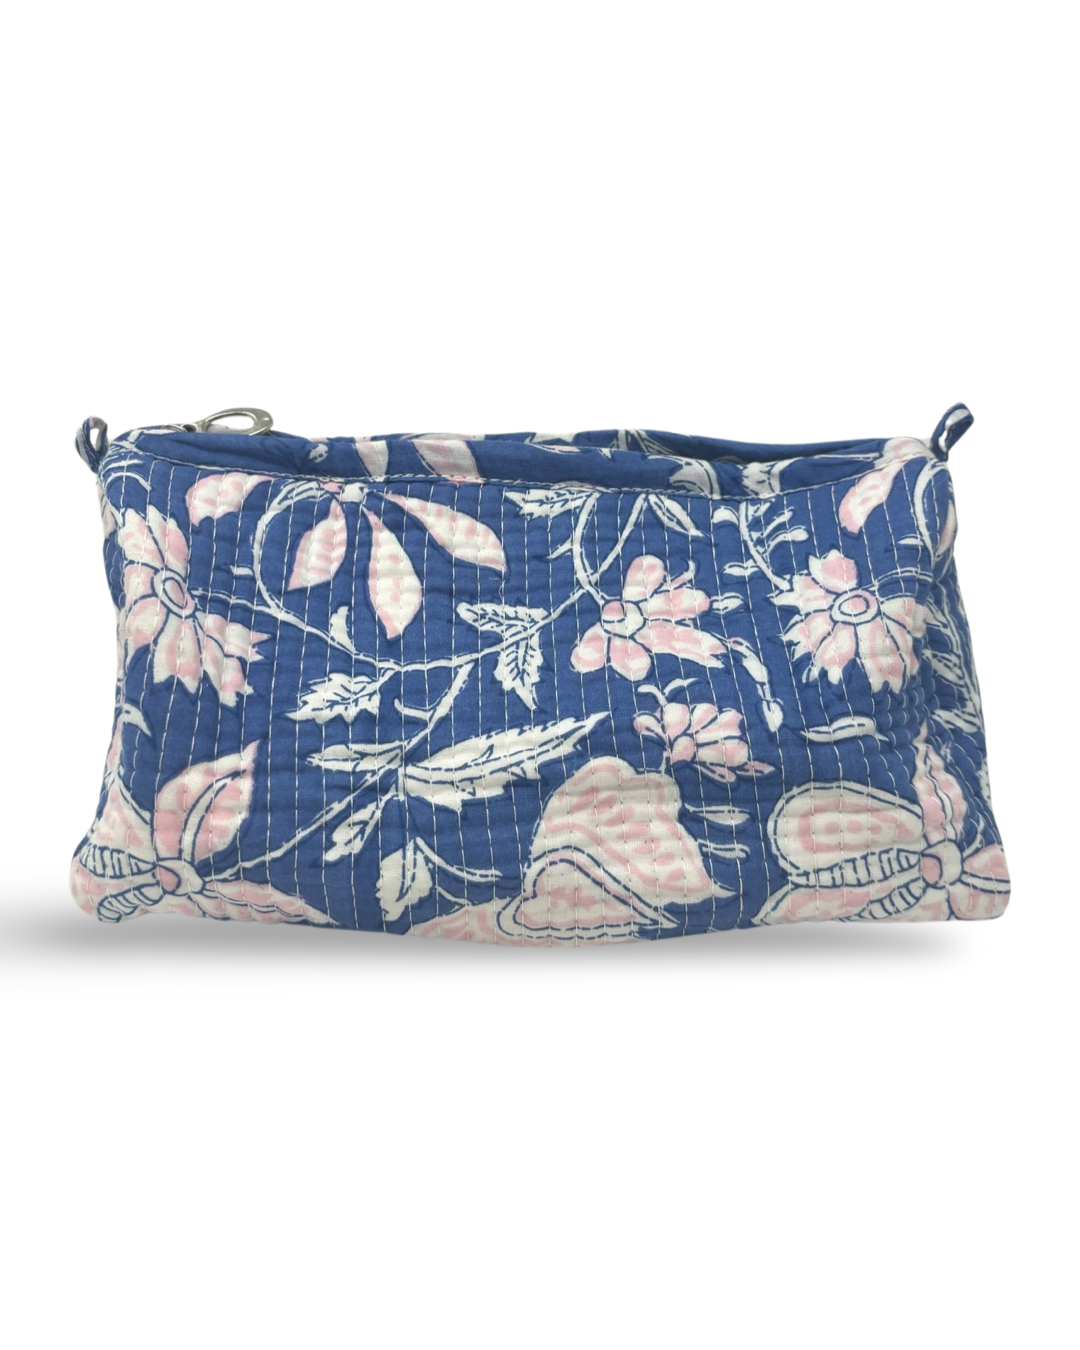 Block Print Pouch in Royal Blue